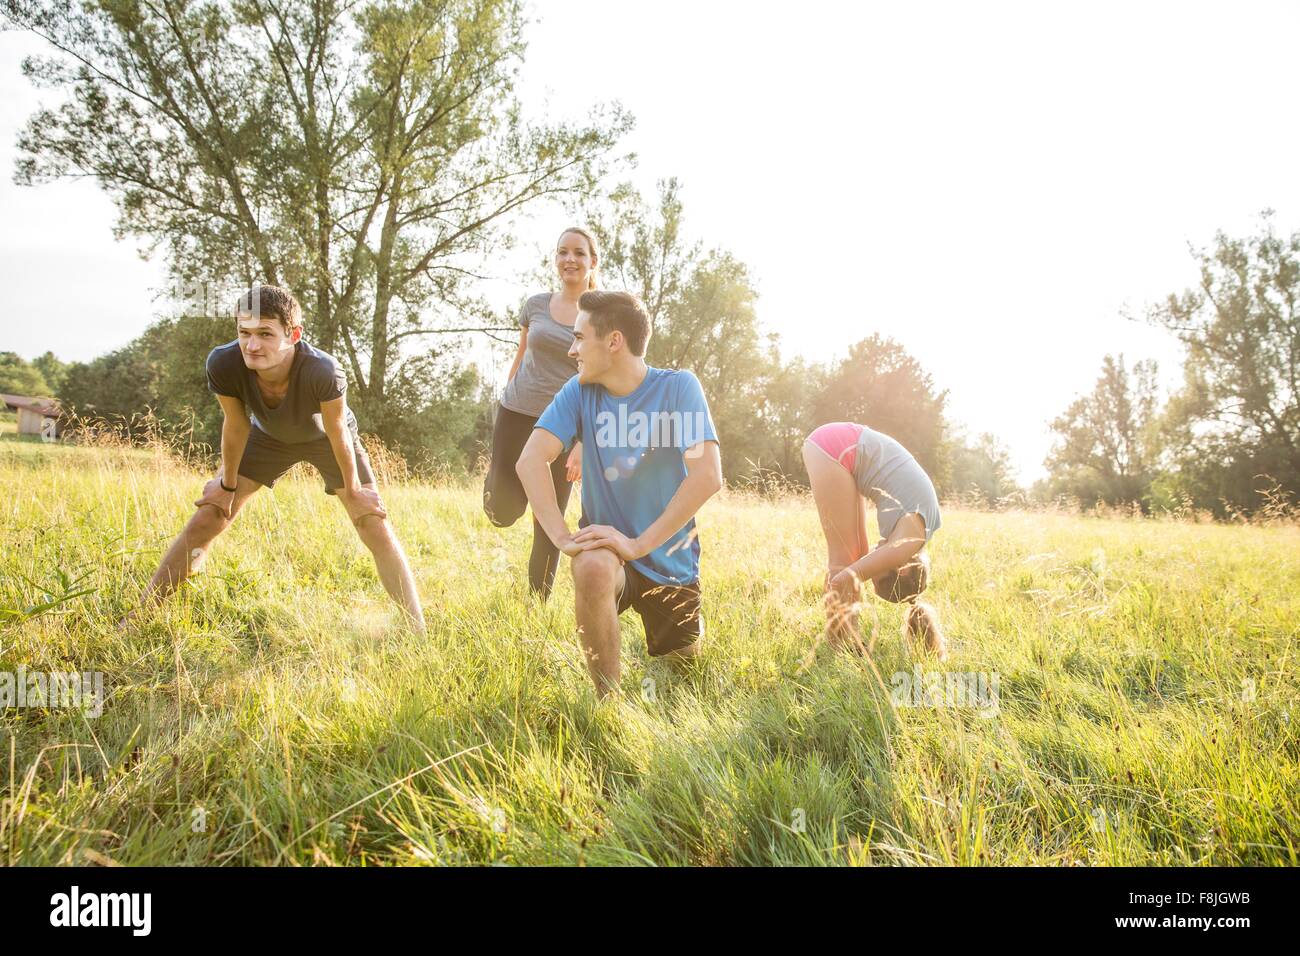 Group of friends exercising in field Stock Photo